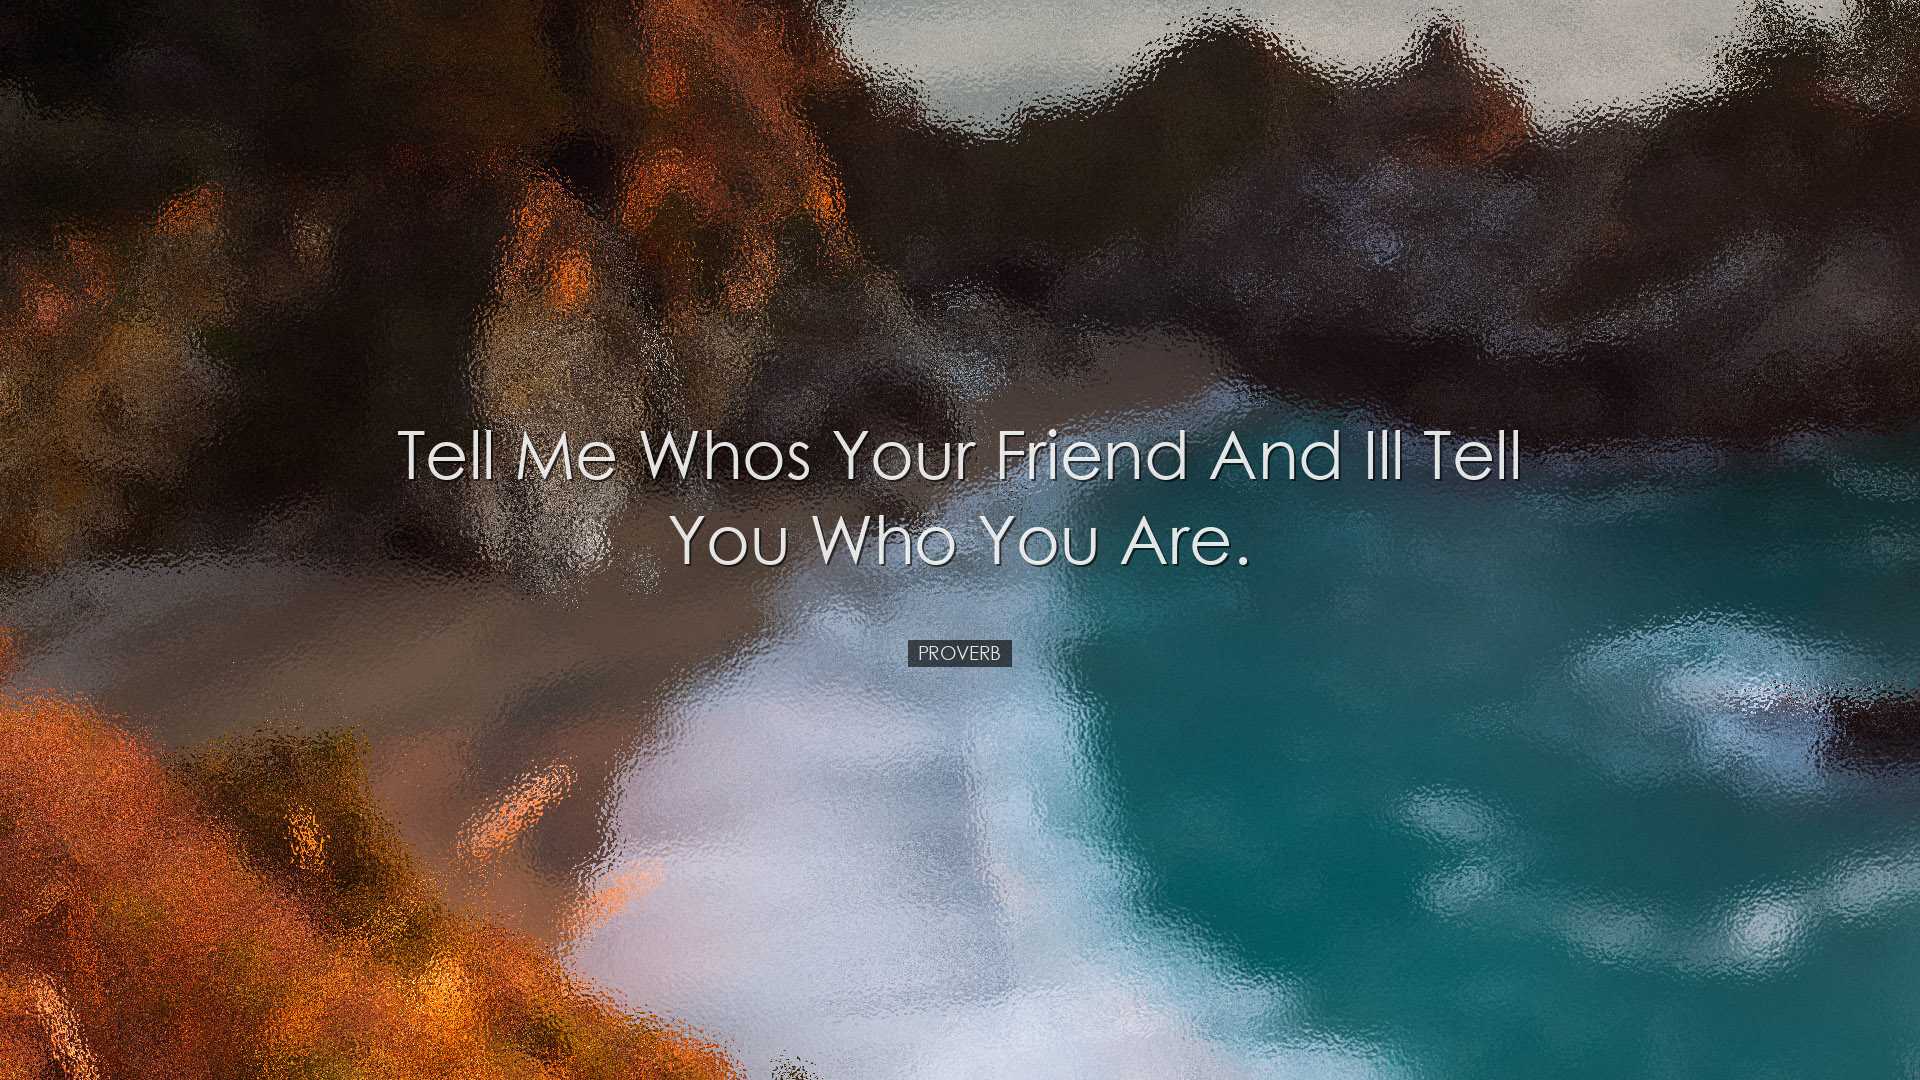 Tell me whos your friend and Ill tell you who you are. - Proverb